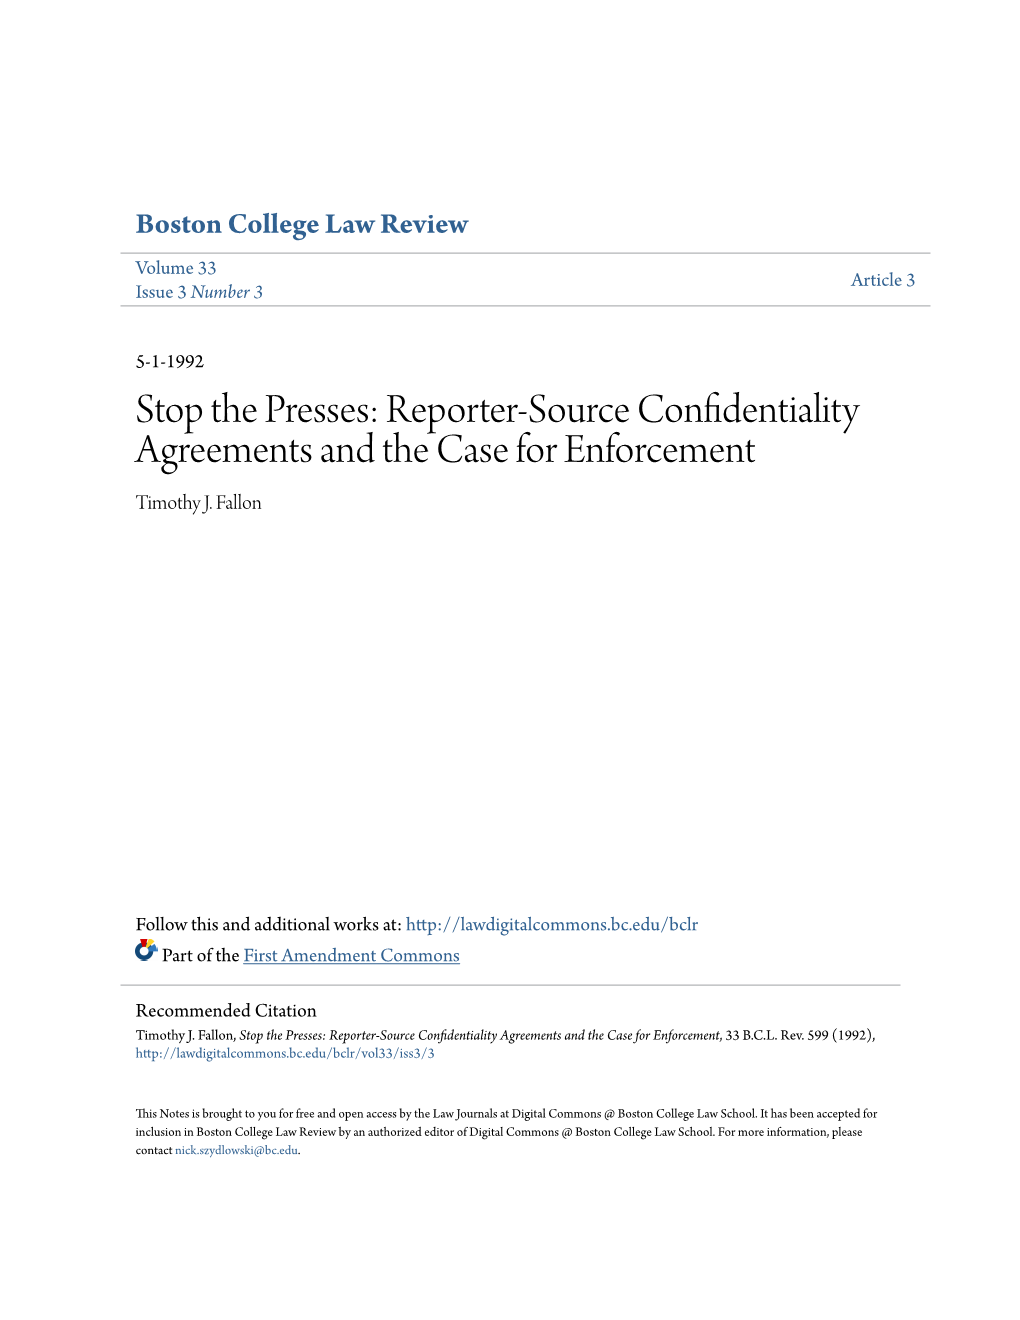 Reporter-Source Confidentiality Agreements and the Case for Enforcement Timothy J